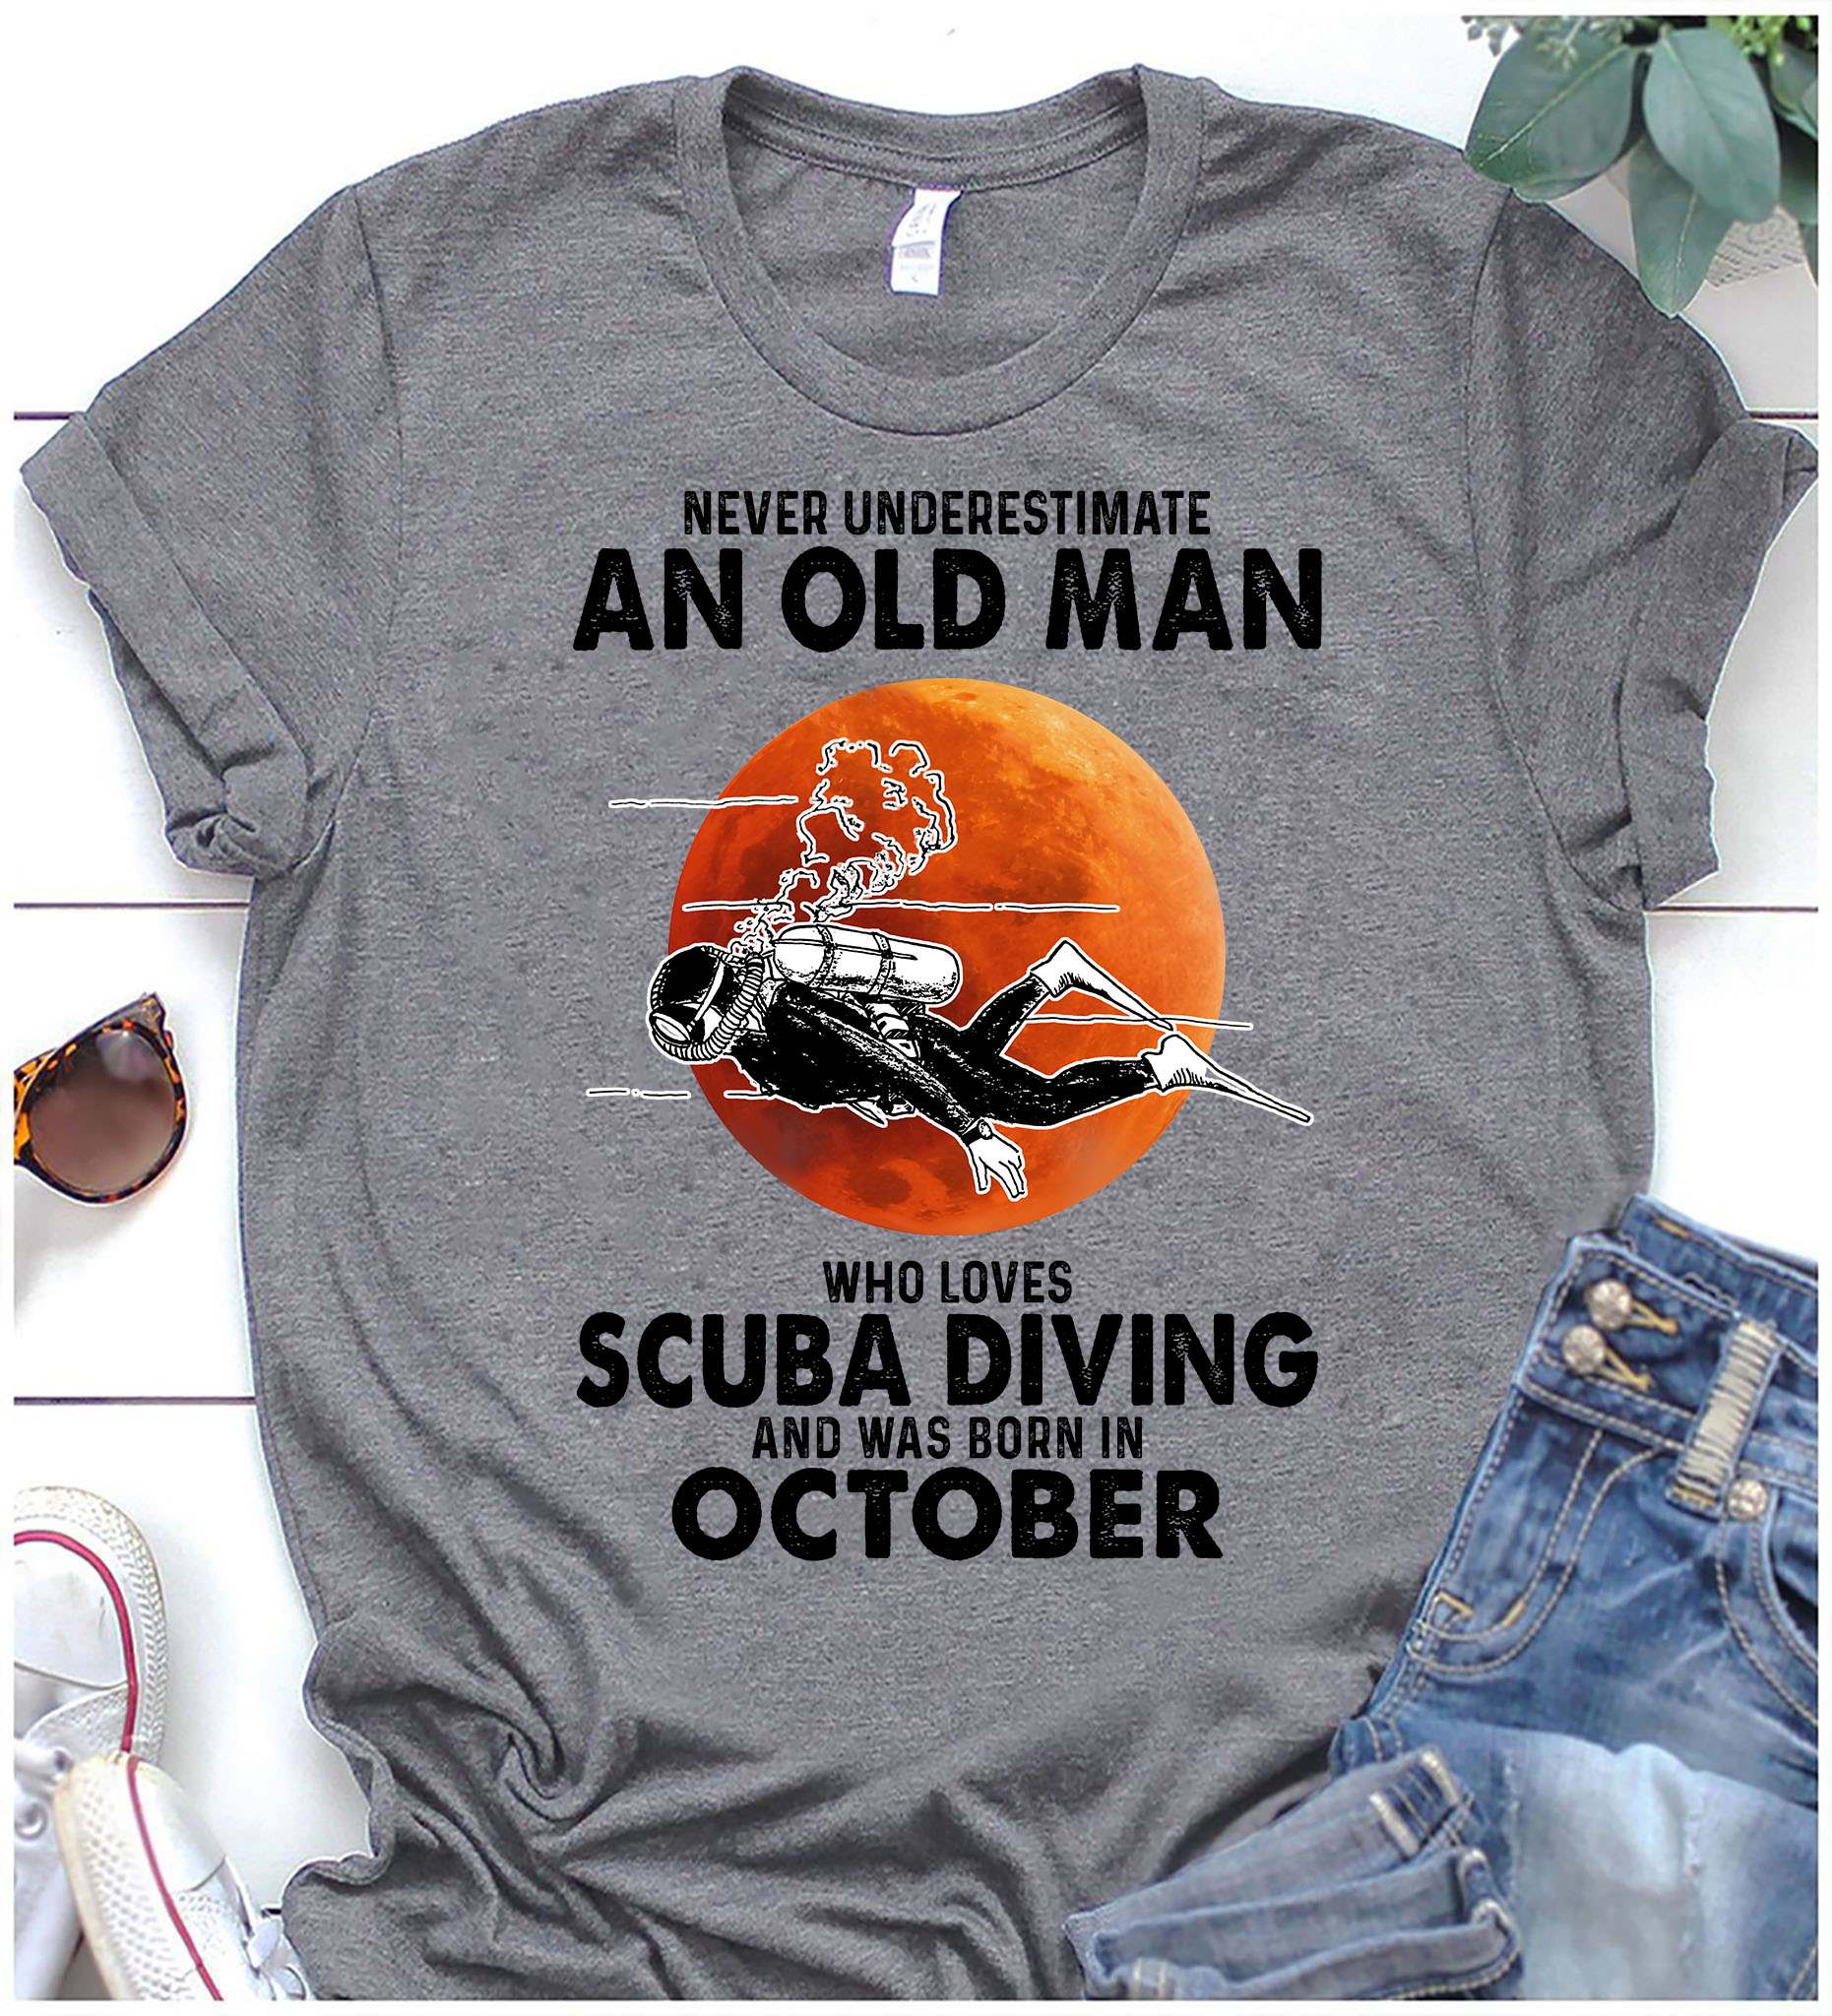 Scuba Diving, October Birthday Man - Never underestimate an old man who loves skiing and was born in october